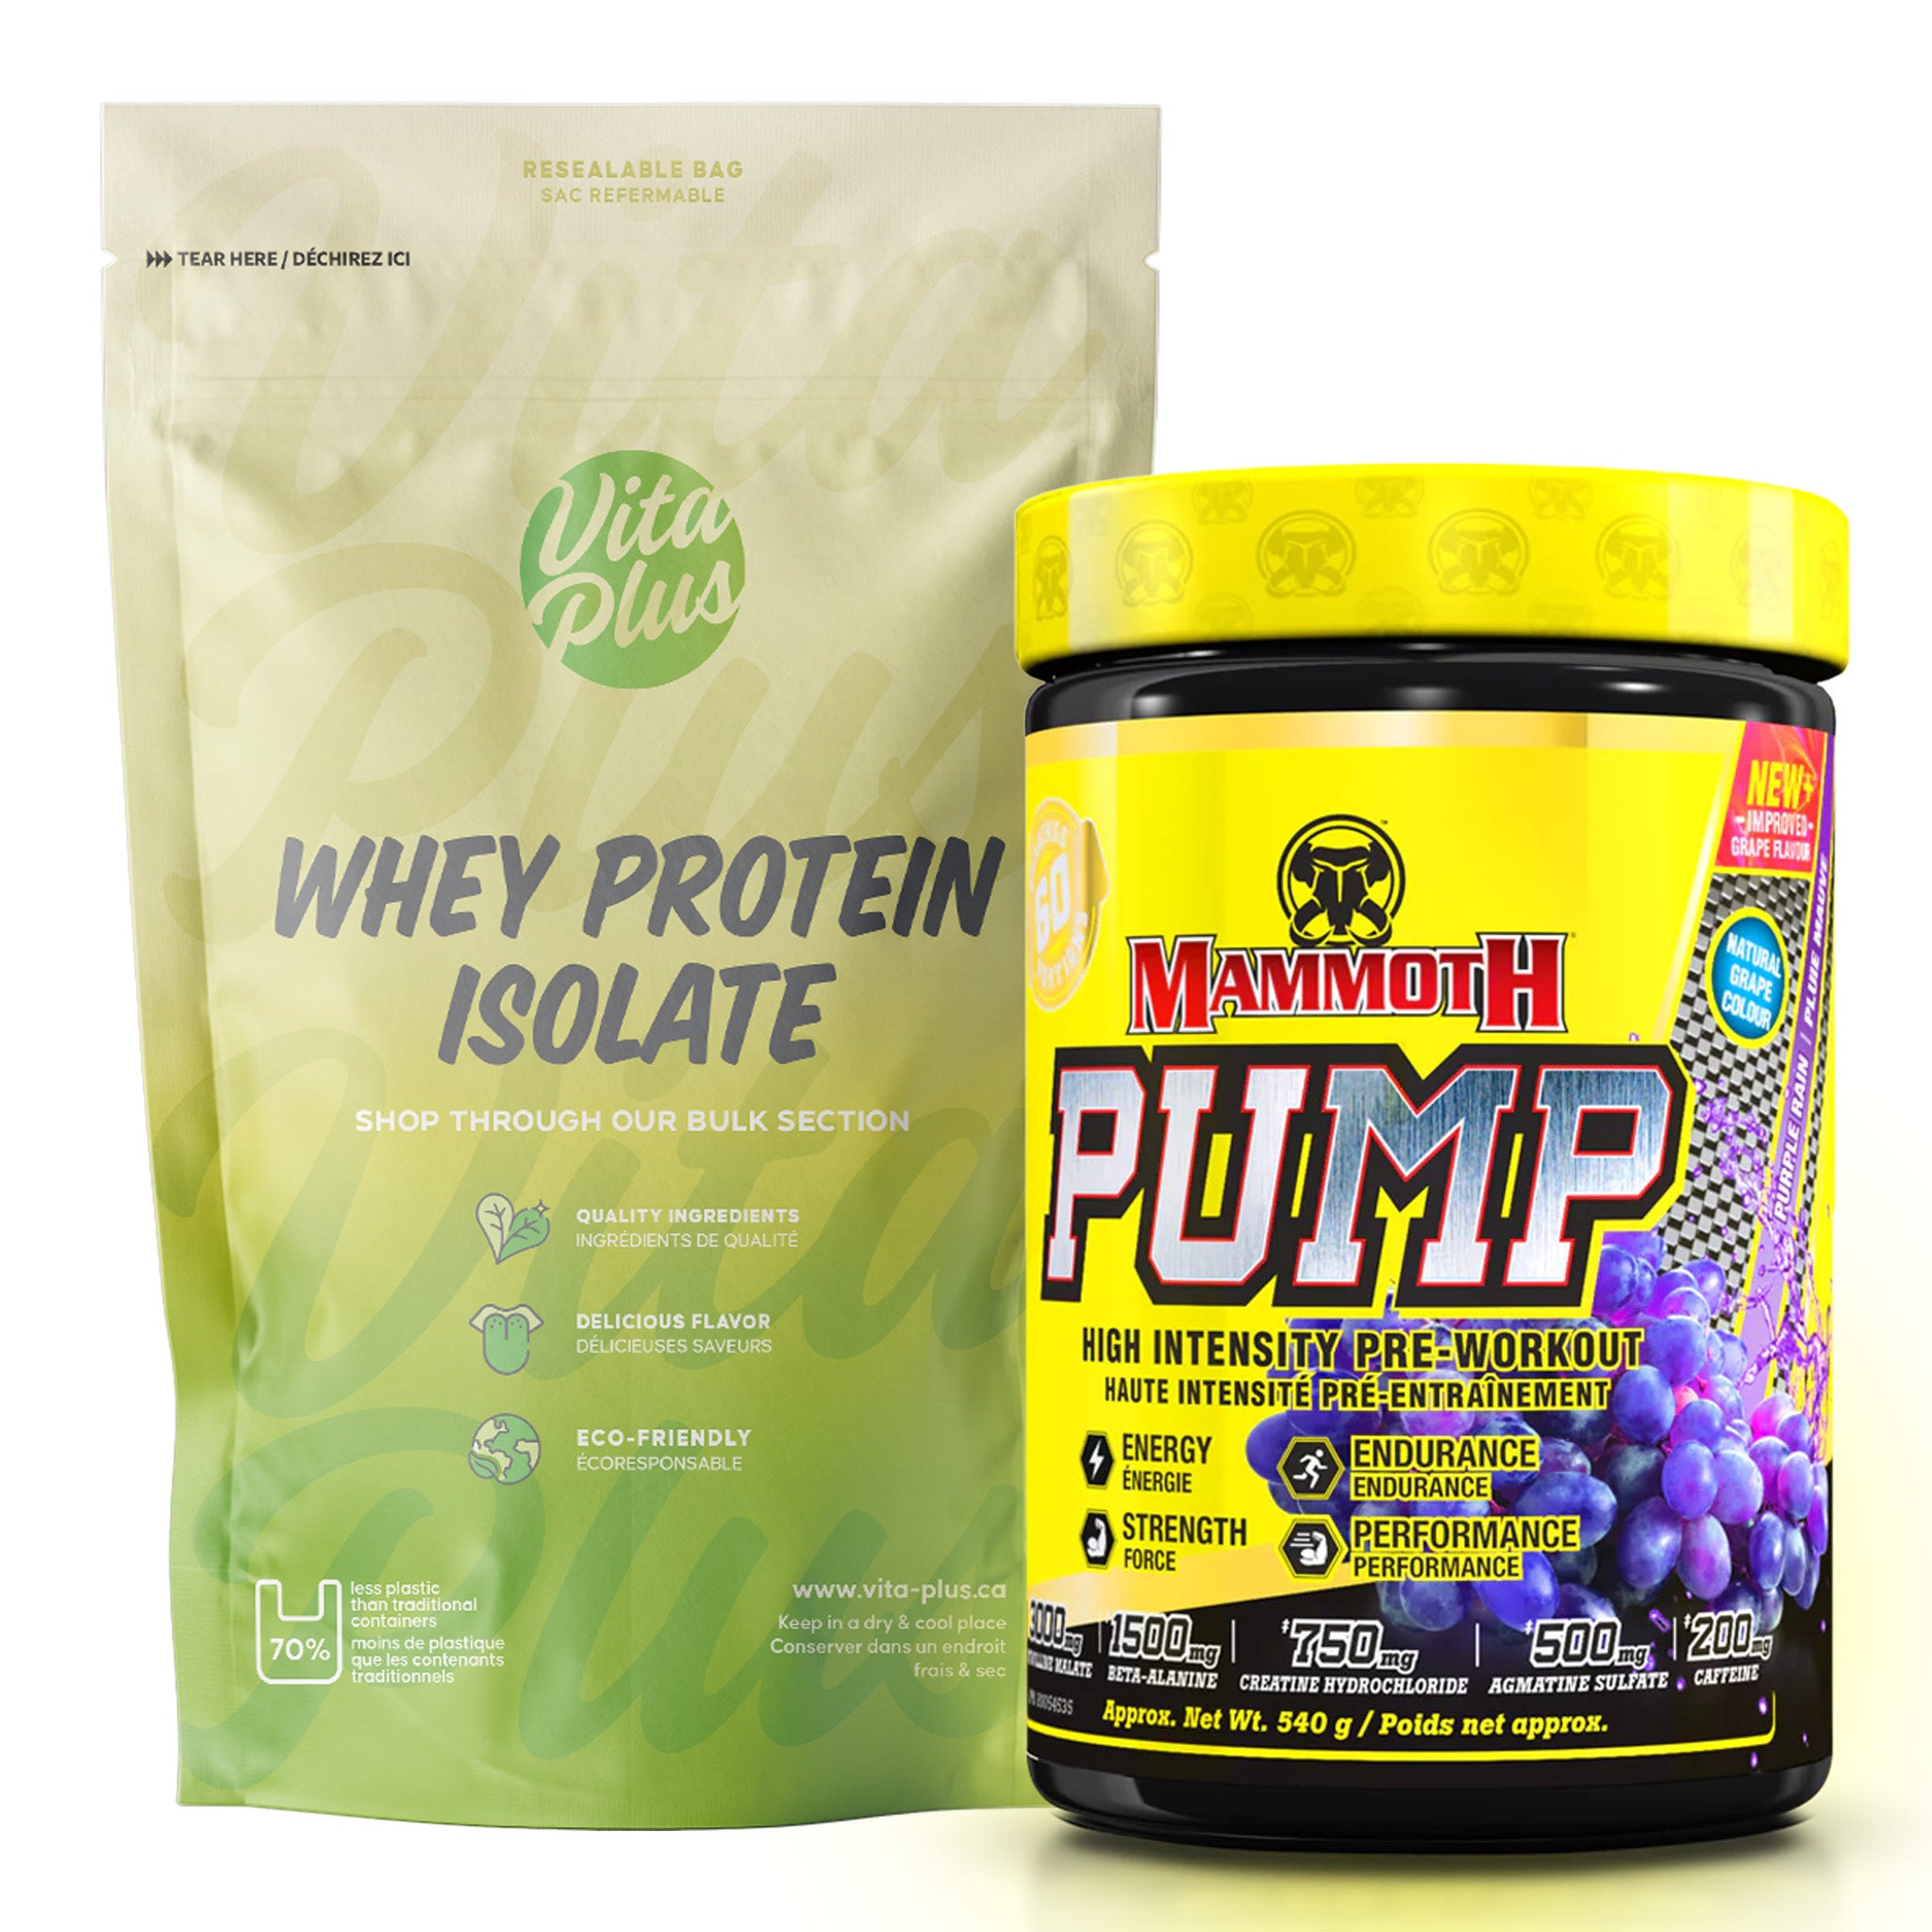 [COMBO] Bulk Whey Protein Isolate (5lb) + Mammoth Pump (60 Servings)